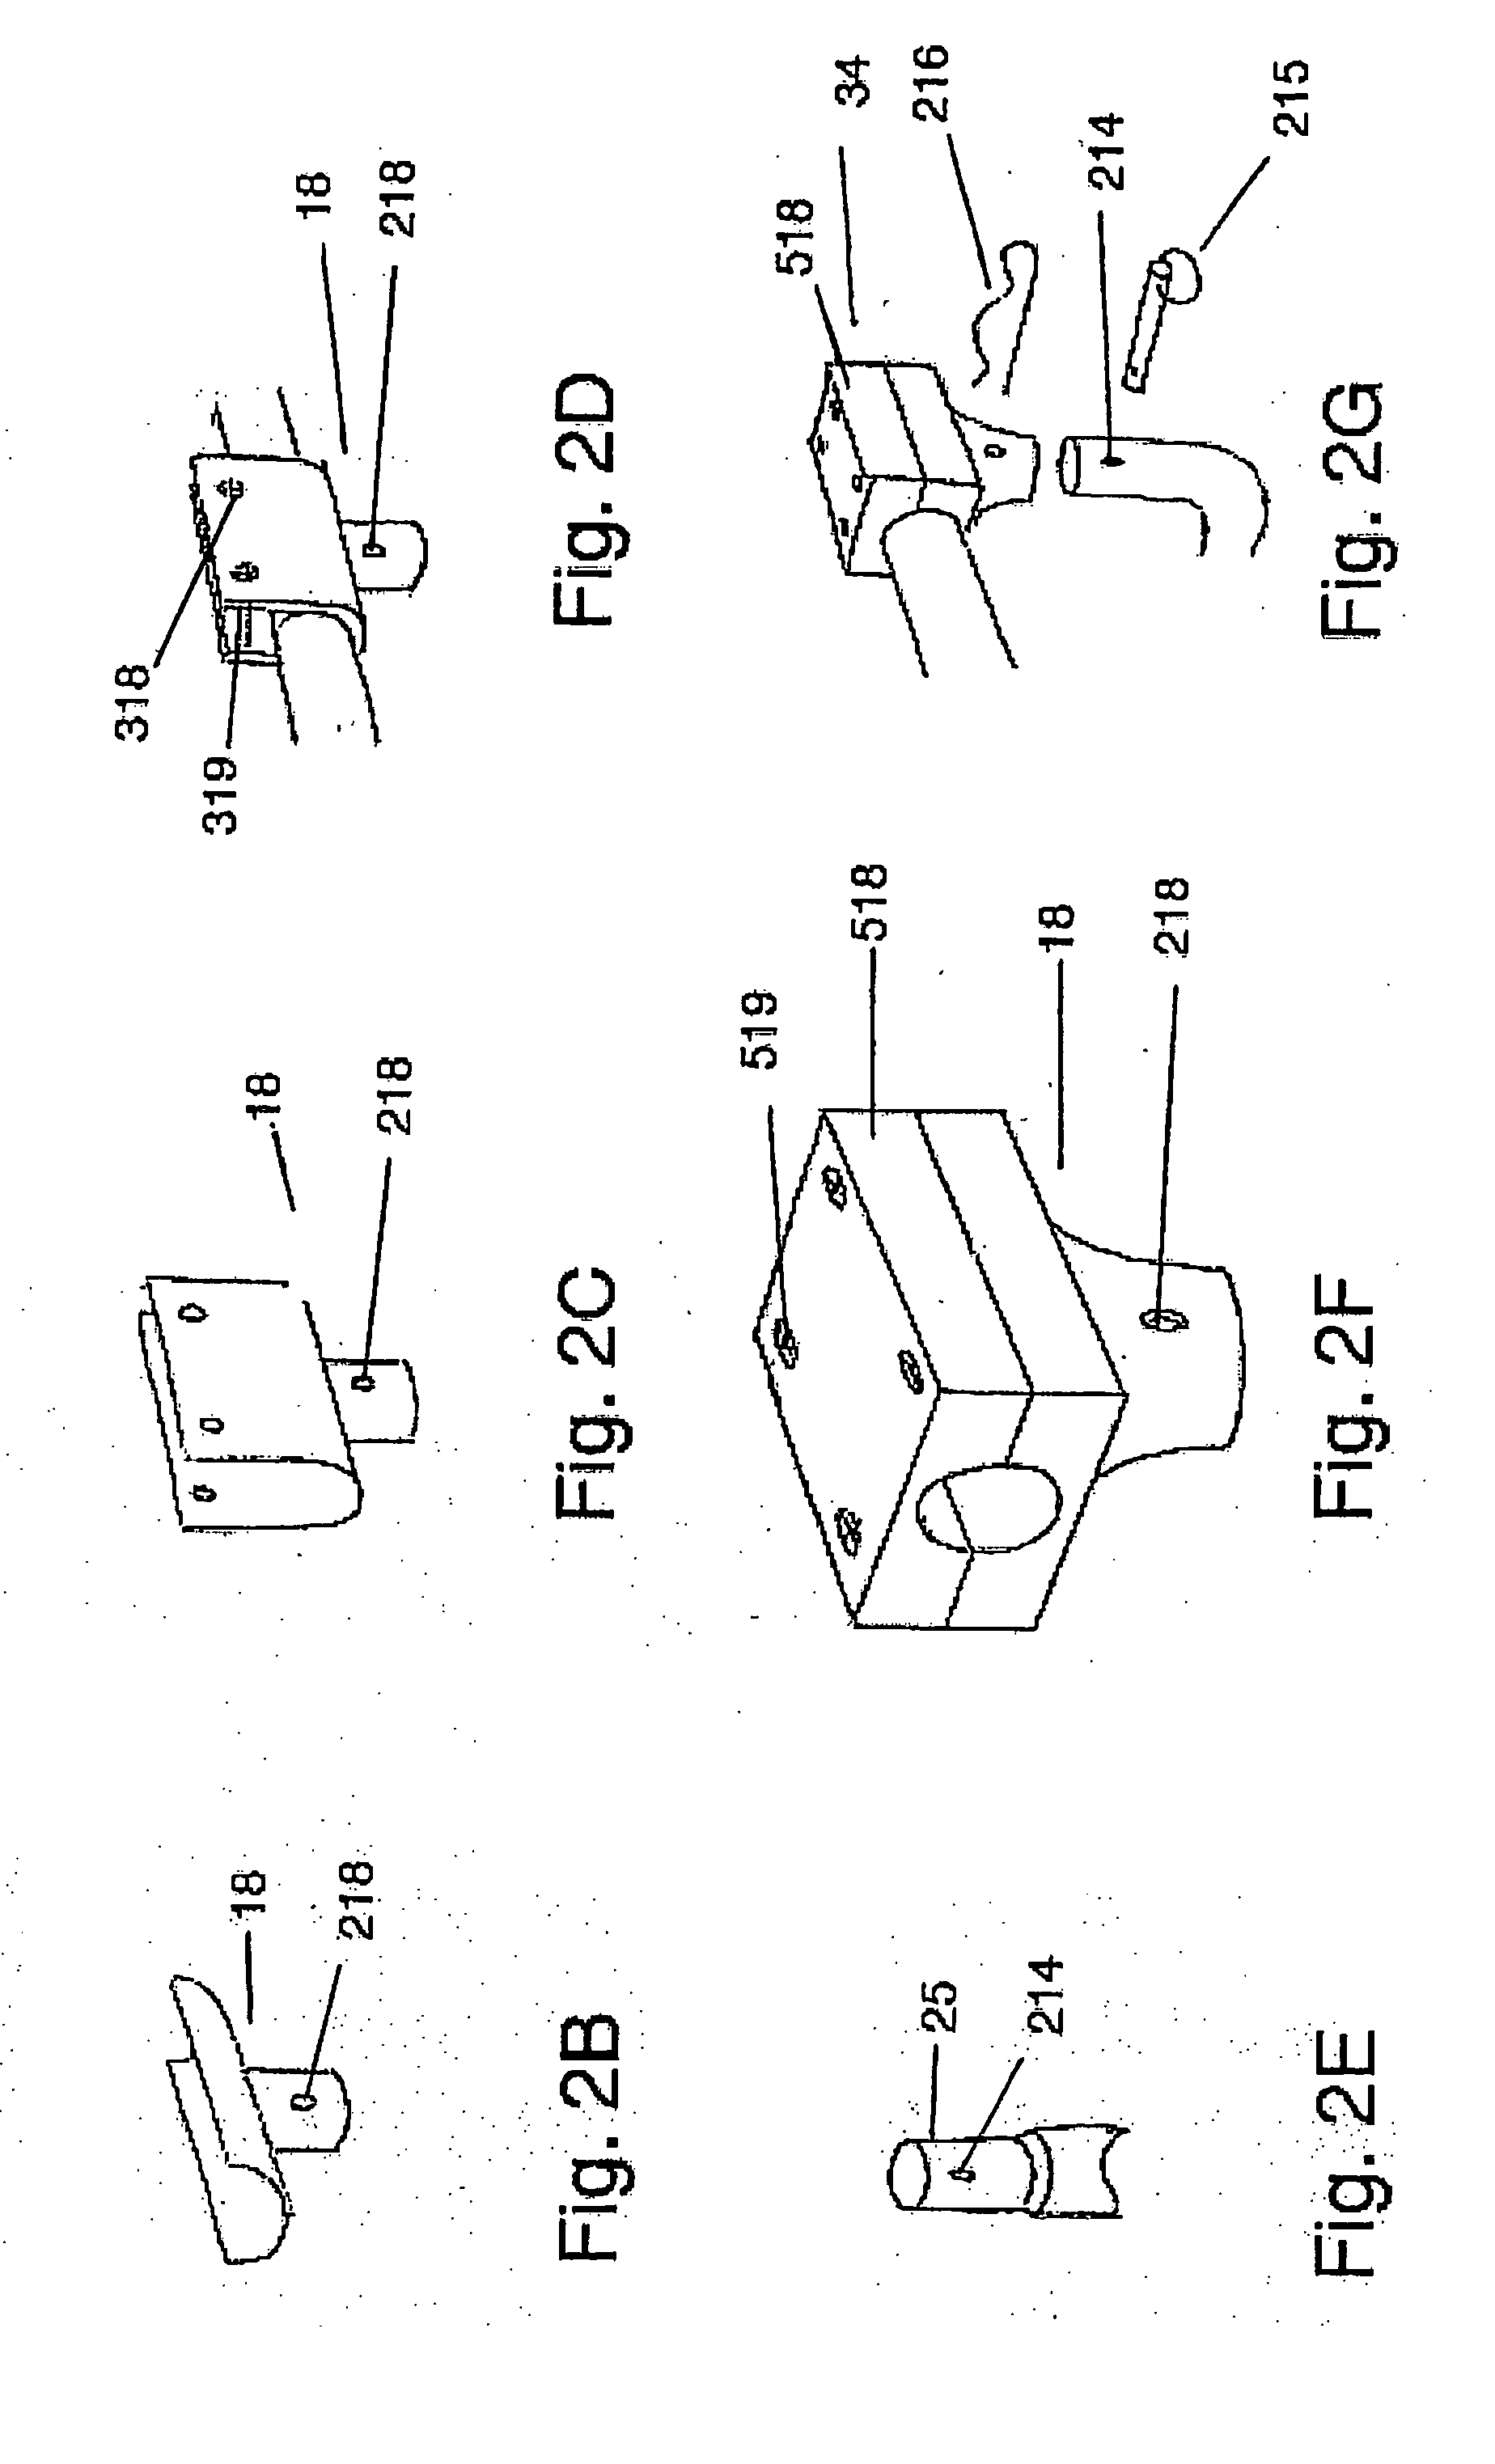 Motorized scooter wheelchair attachment device